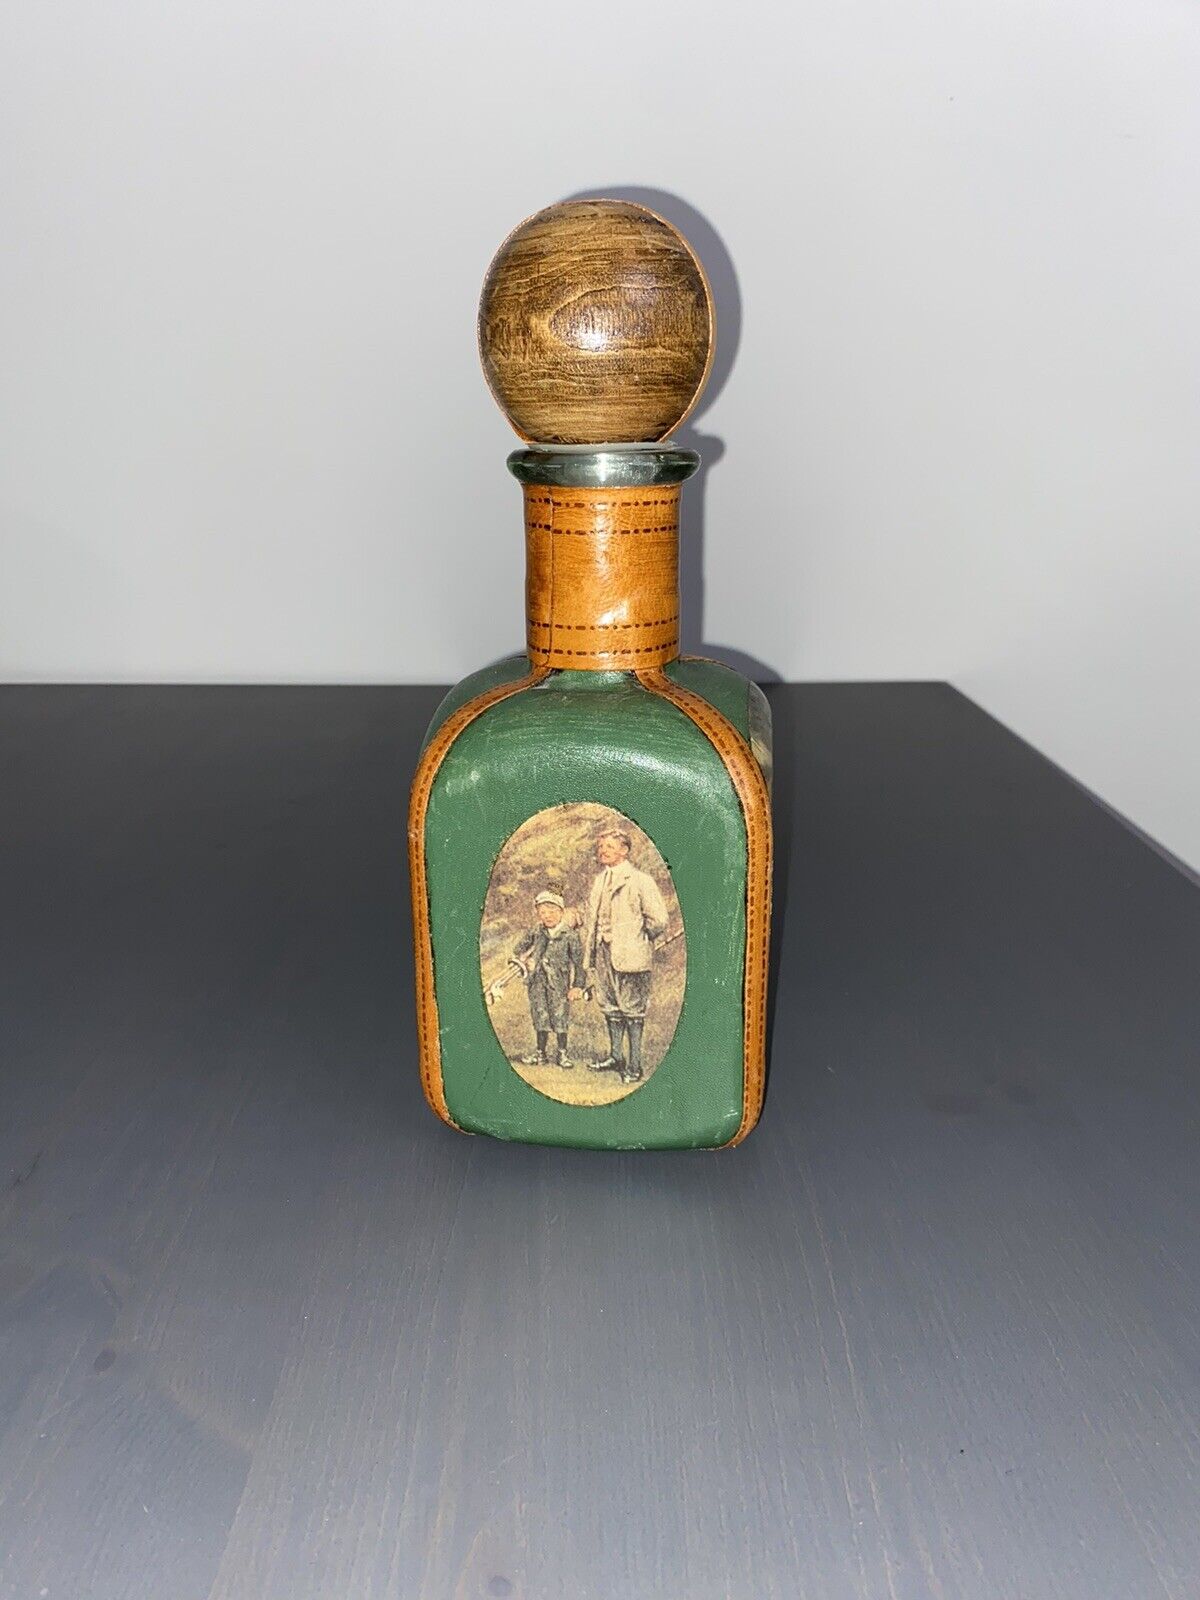 Vintage Genuine Italian leather wrapped glass decanter